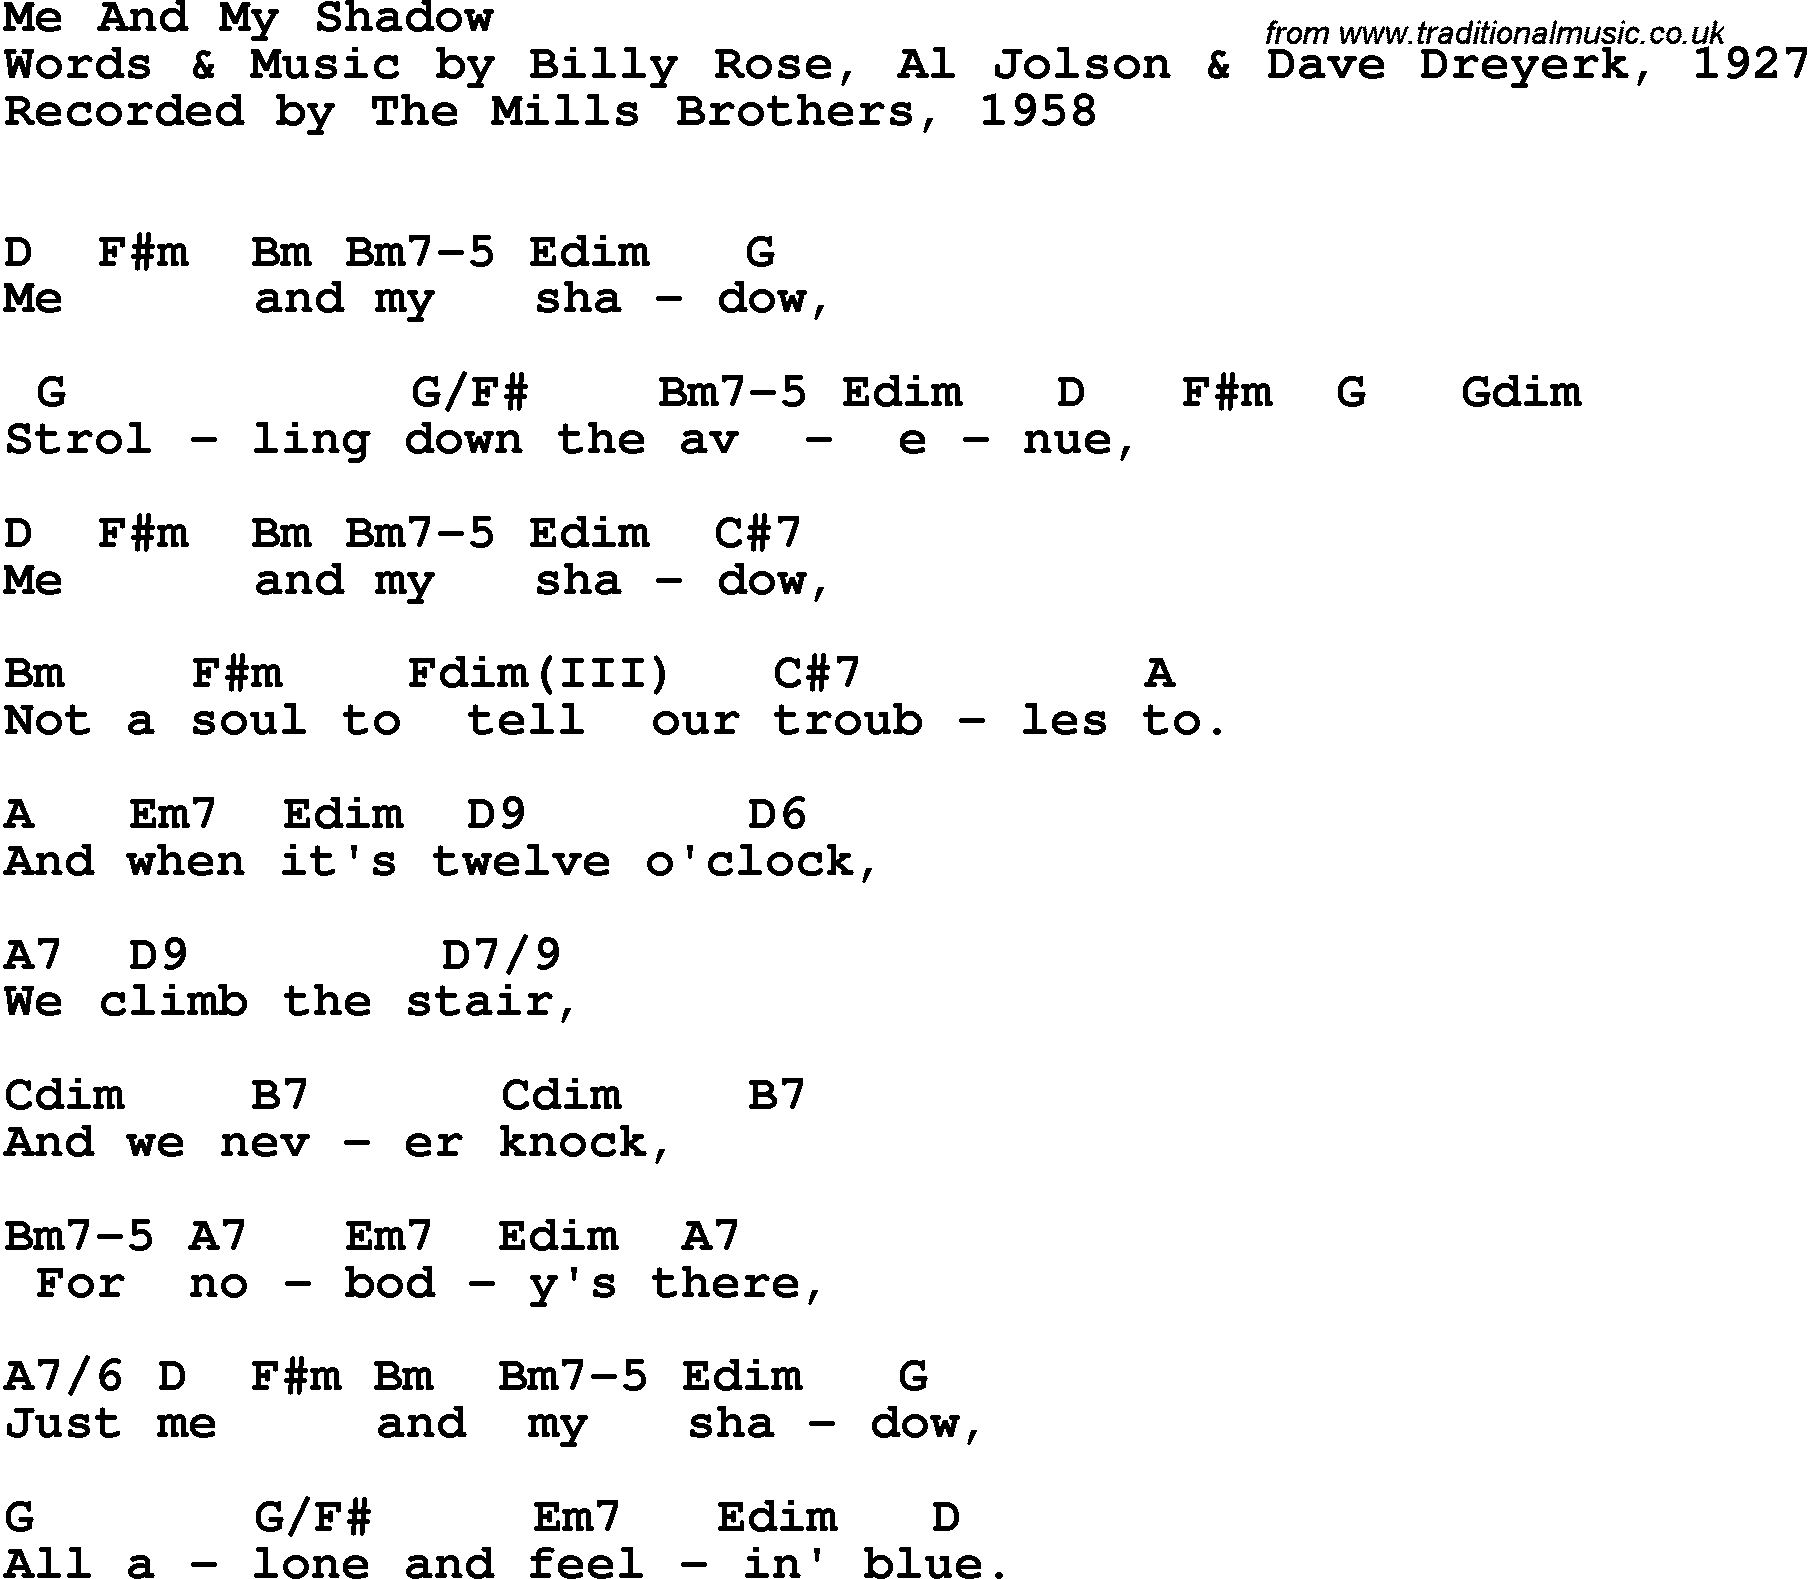 Song Lyrics with guitar chords for Me And My Shadow - The Mills Brothers, 1958